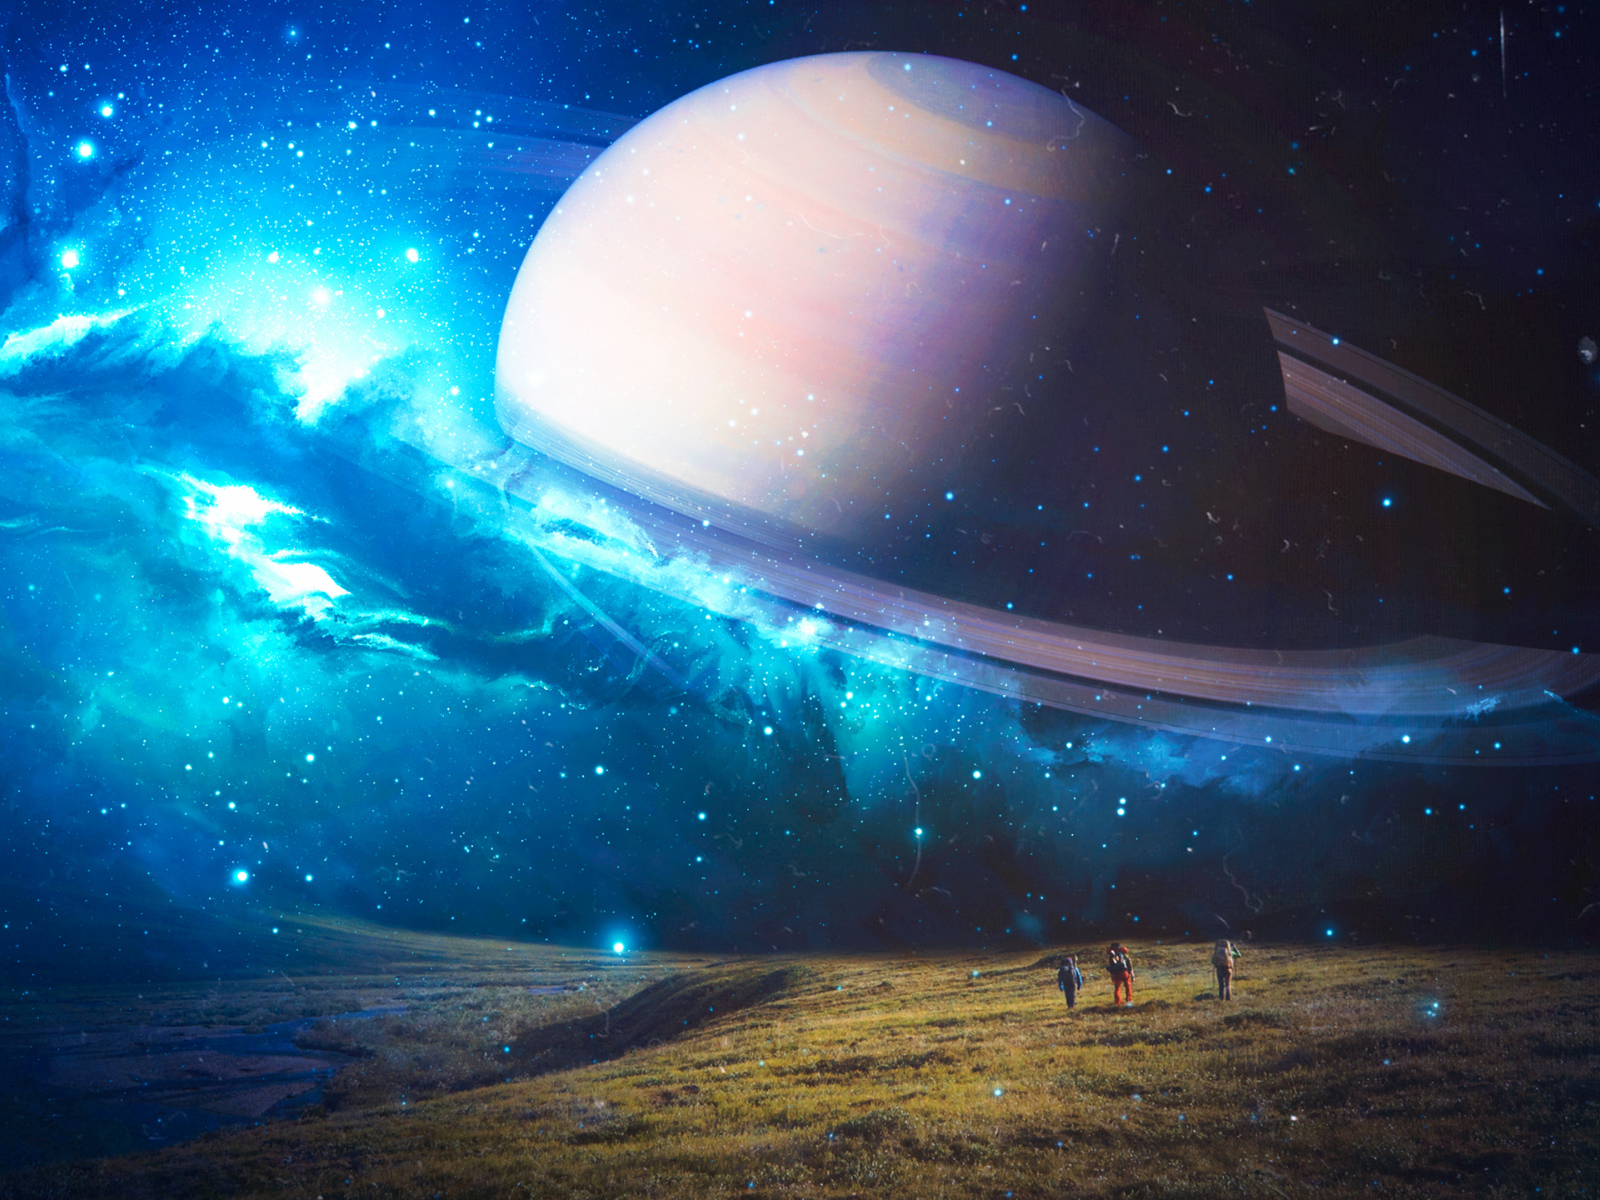 Saturn big planet in neon sky above the earth